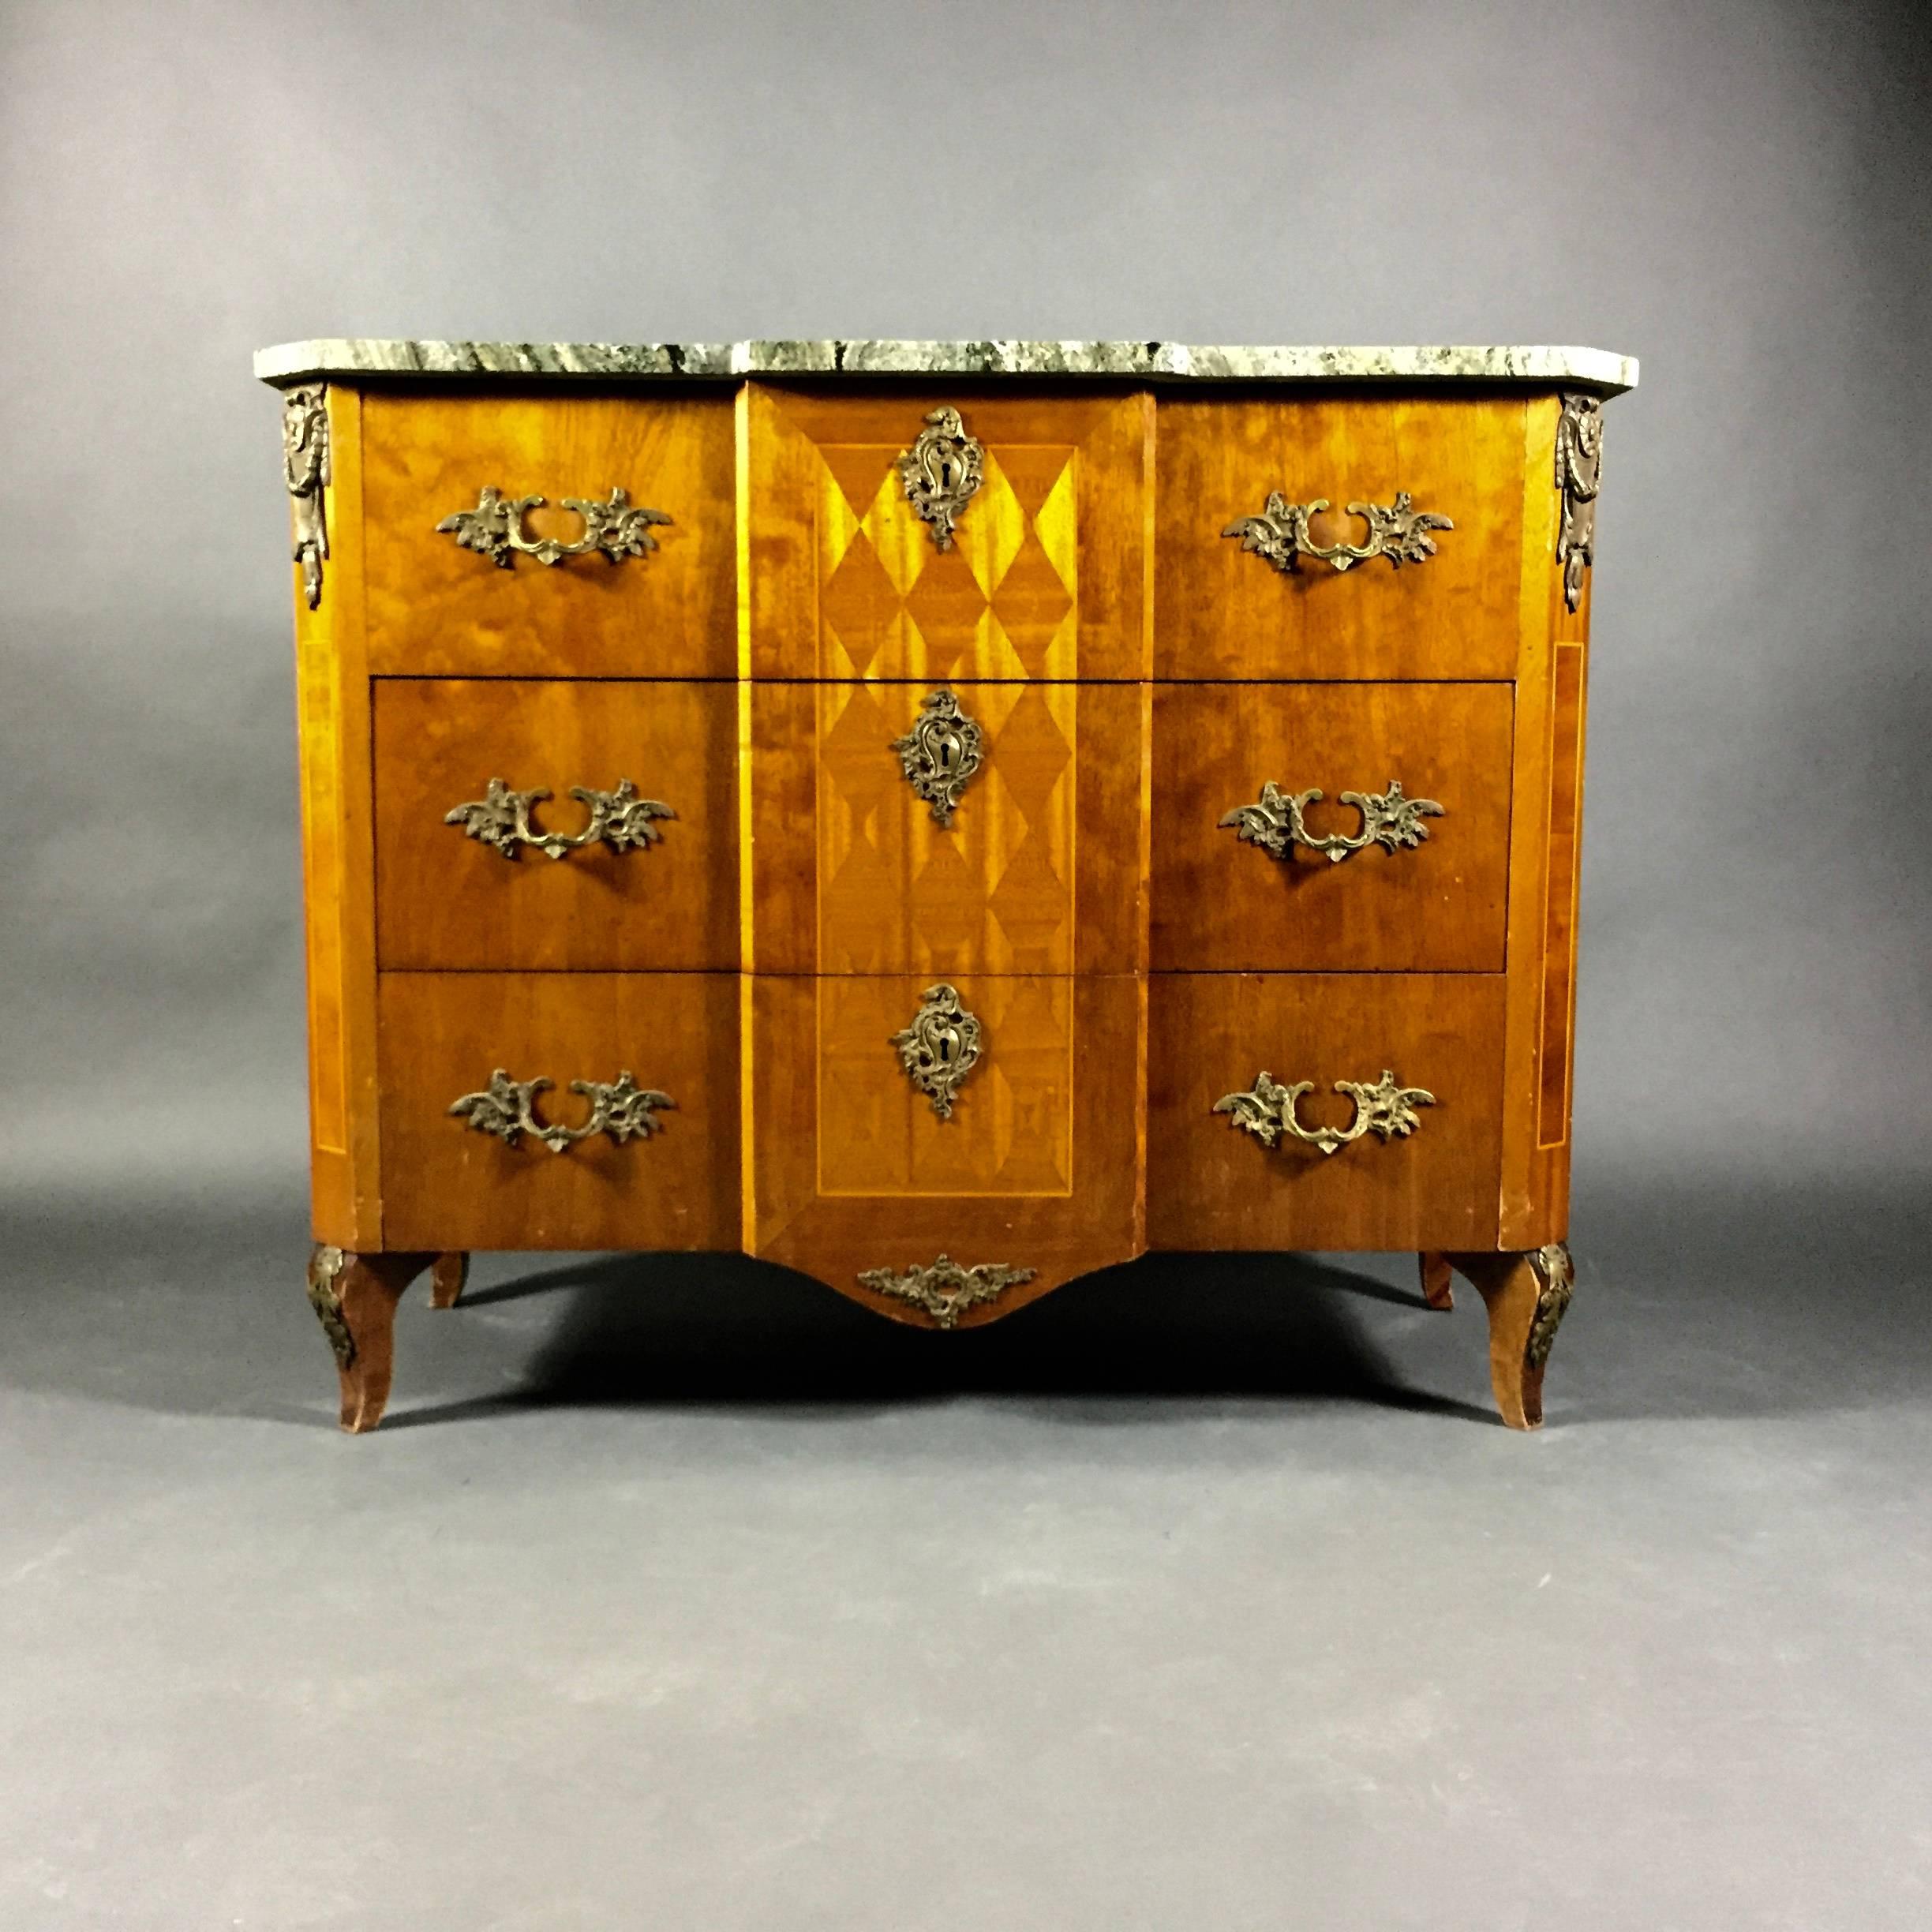 Created in the Art Nouveau period this four-drawer dresser in beautiful lacquered mahogany includes geometric intarsia to the raised centre and dresser sides. Exceptional detail to brass accents, drawer pulls, key plate, leg at top and bottom. Top